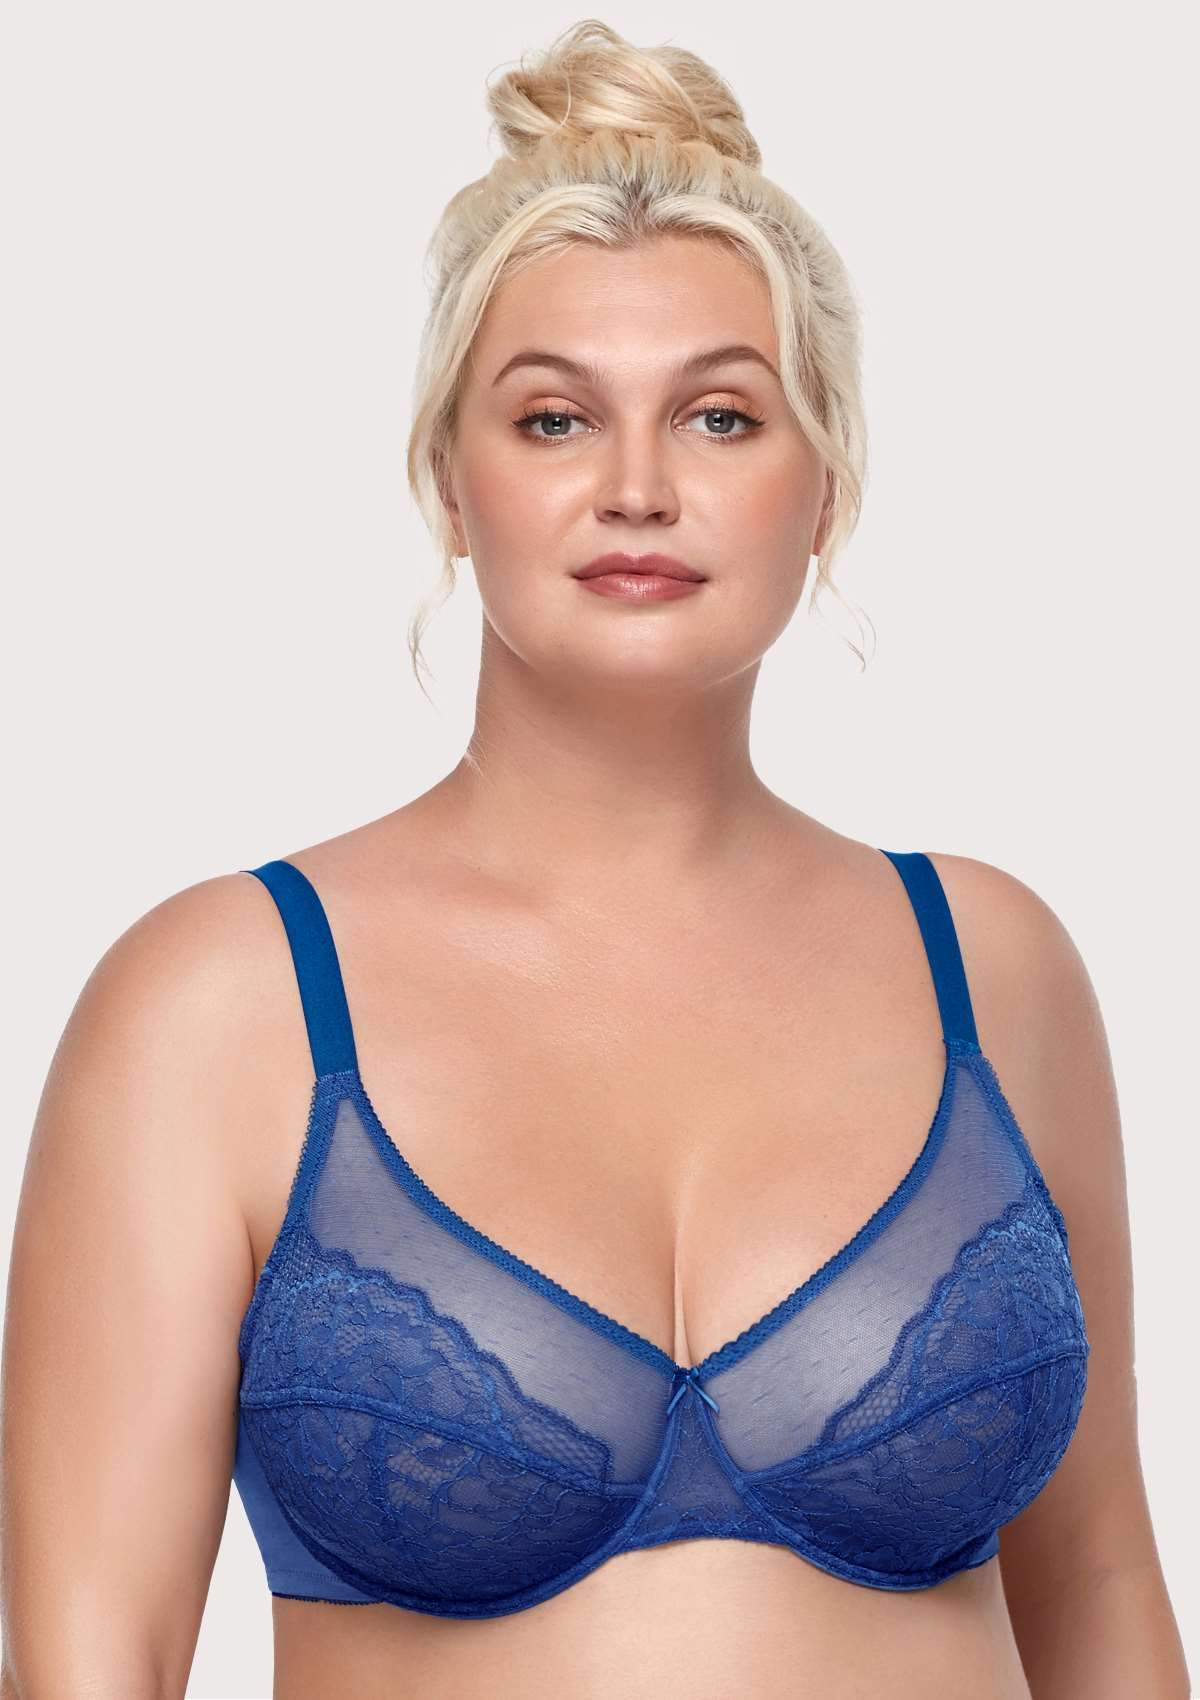 HSIA Enchante Full Coverage Bra: Supportive Bra For Big Busts - Balsam Blue / 42 / C